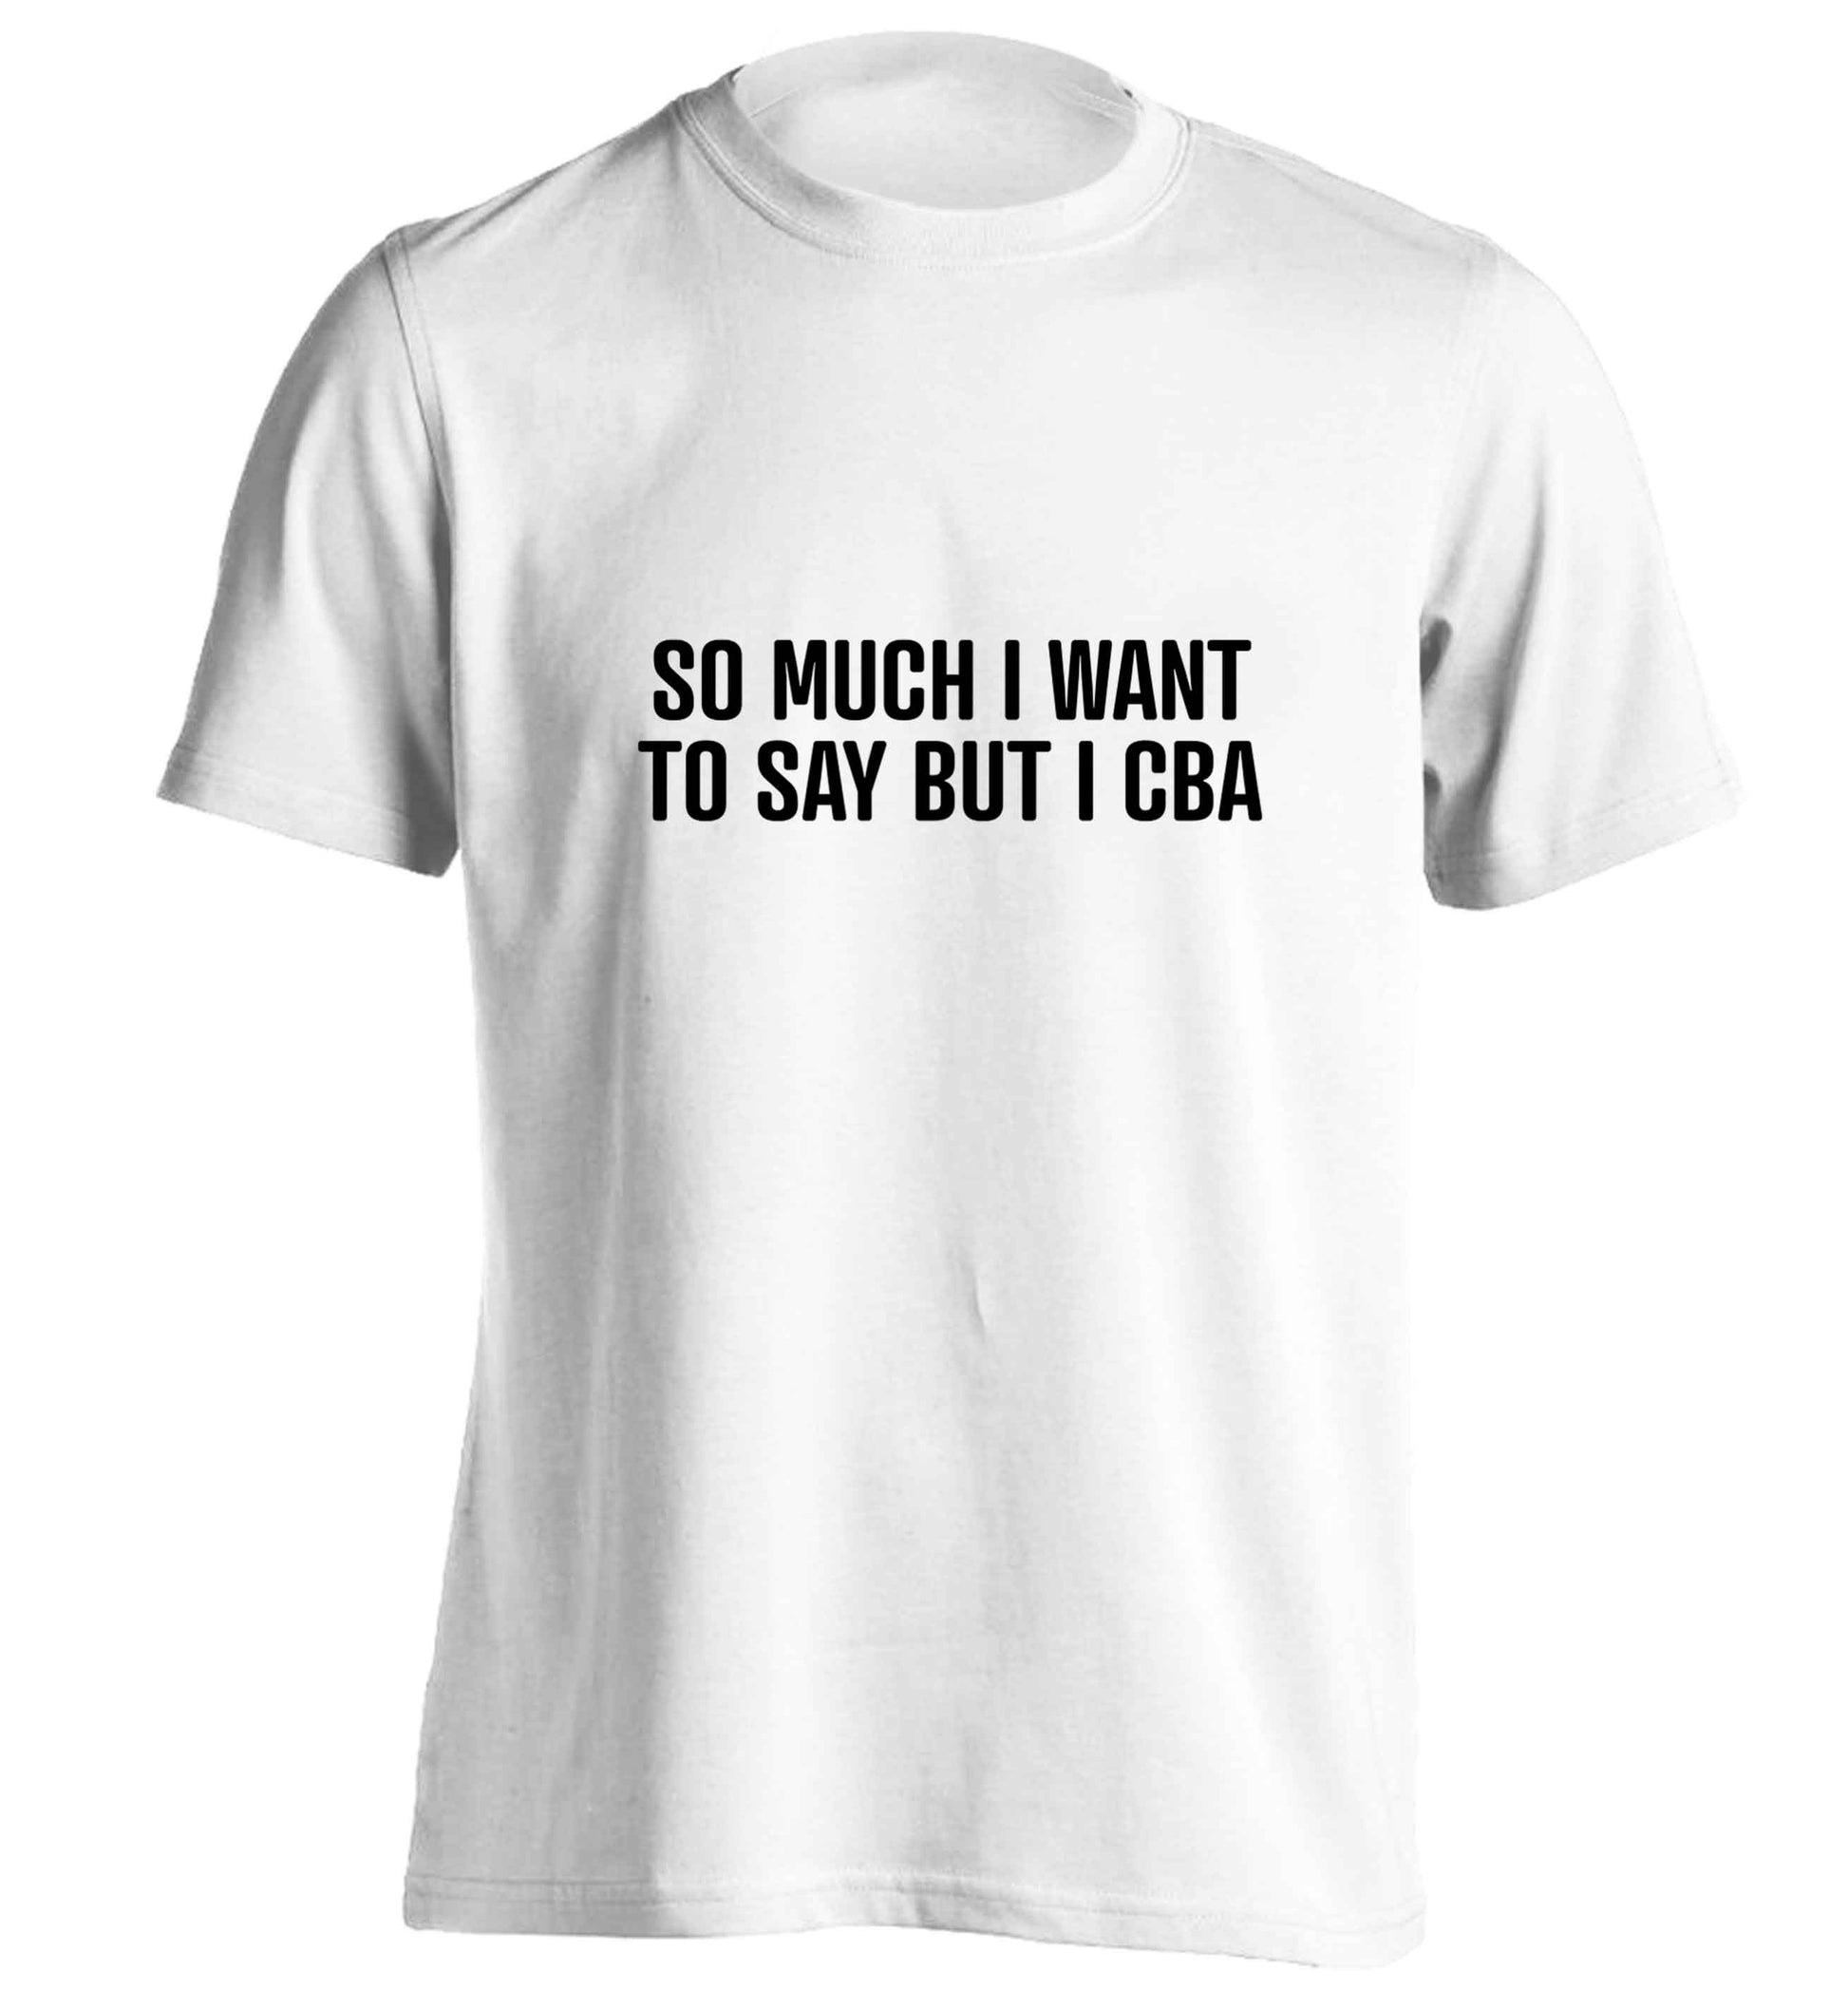 So much I want to say I cba  adults unisex white Tshirt 2XL